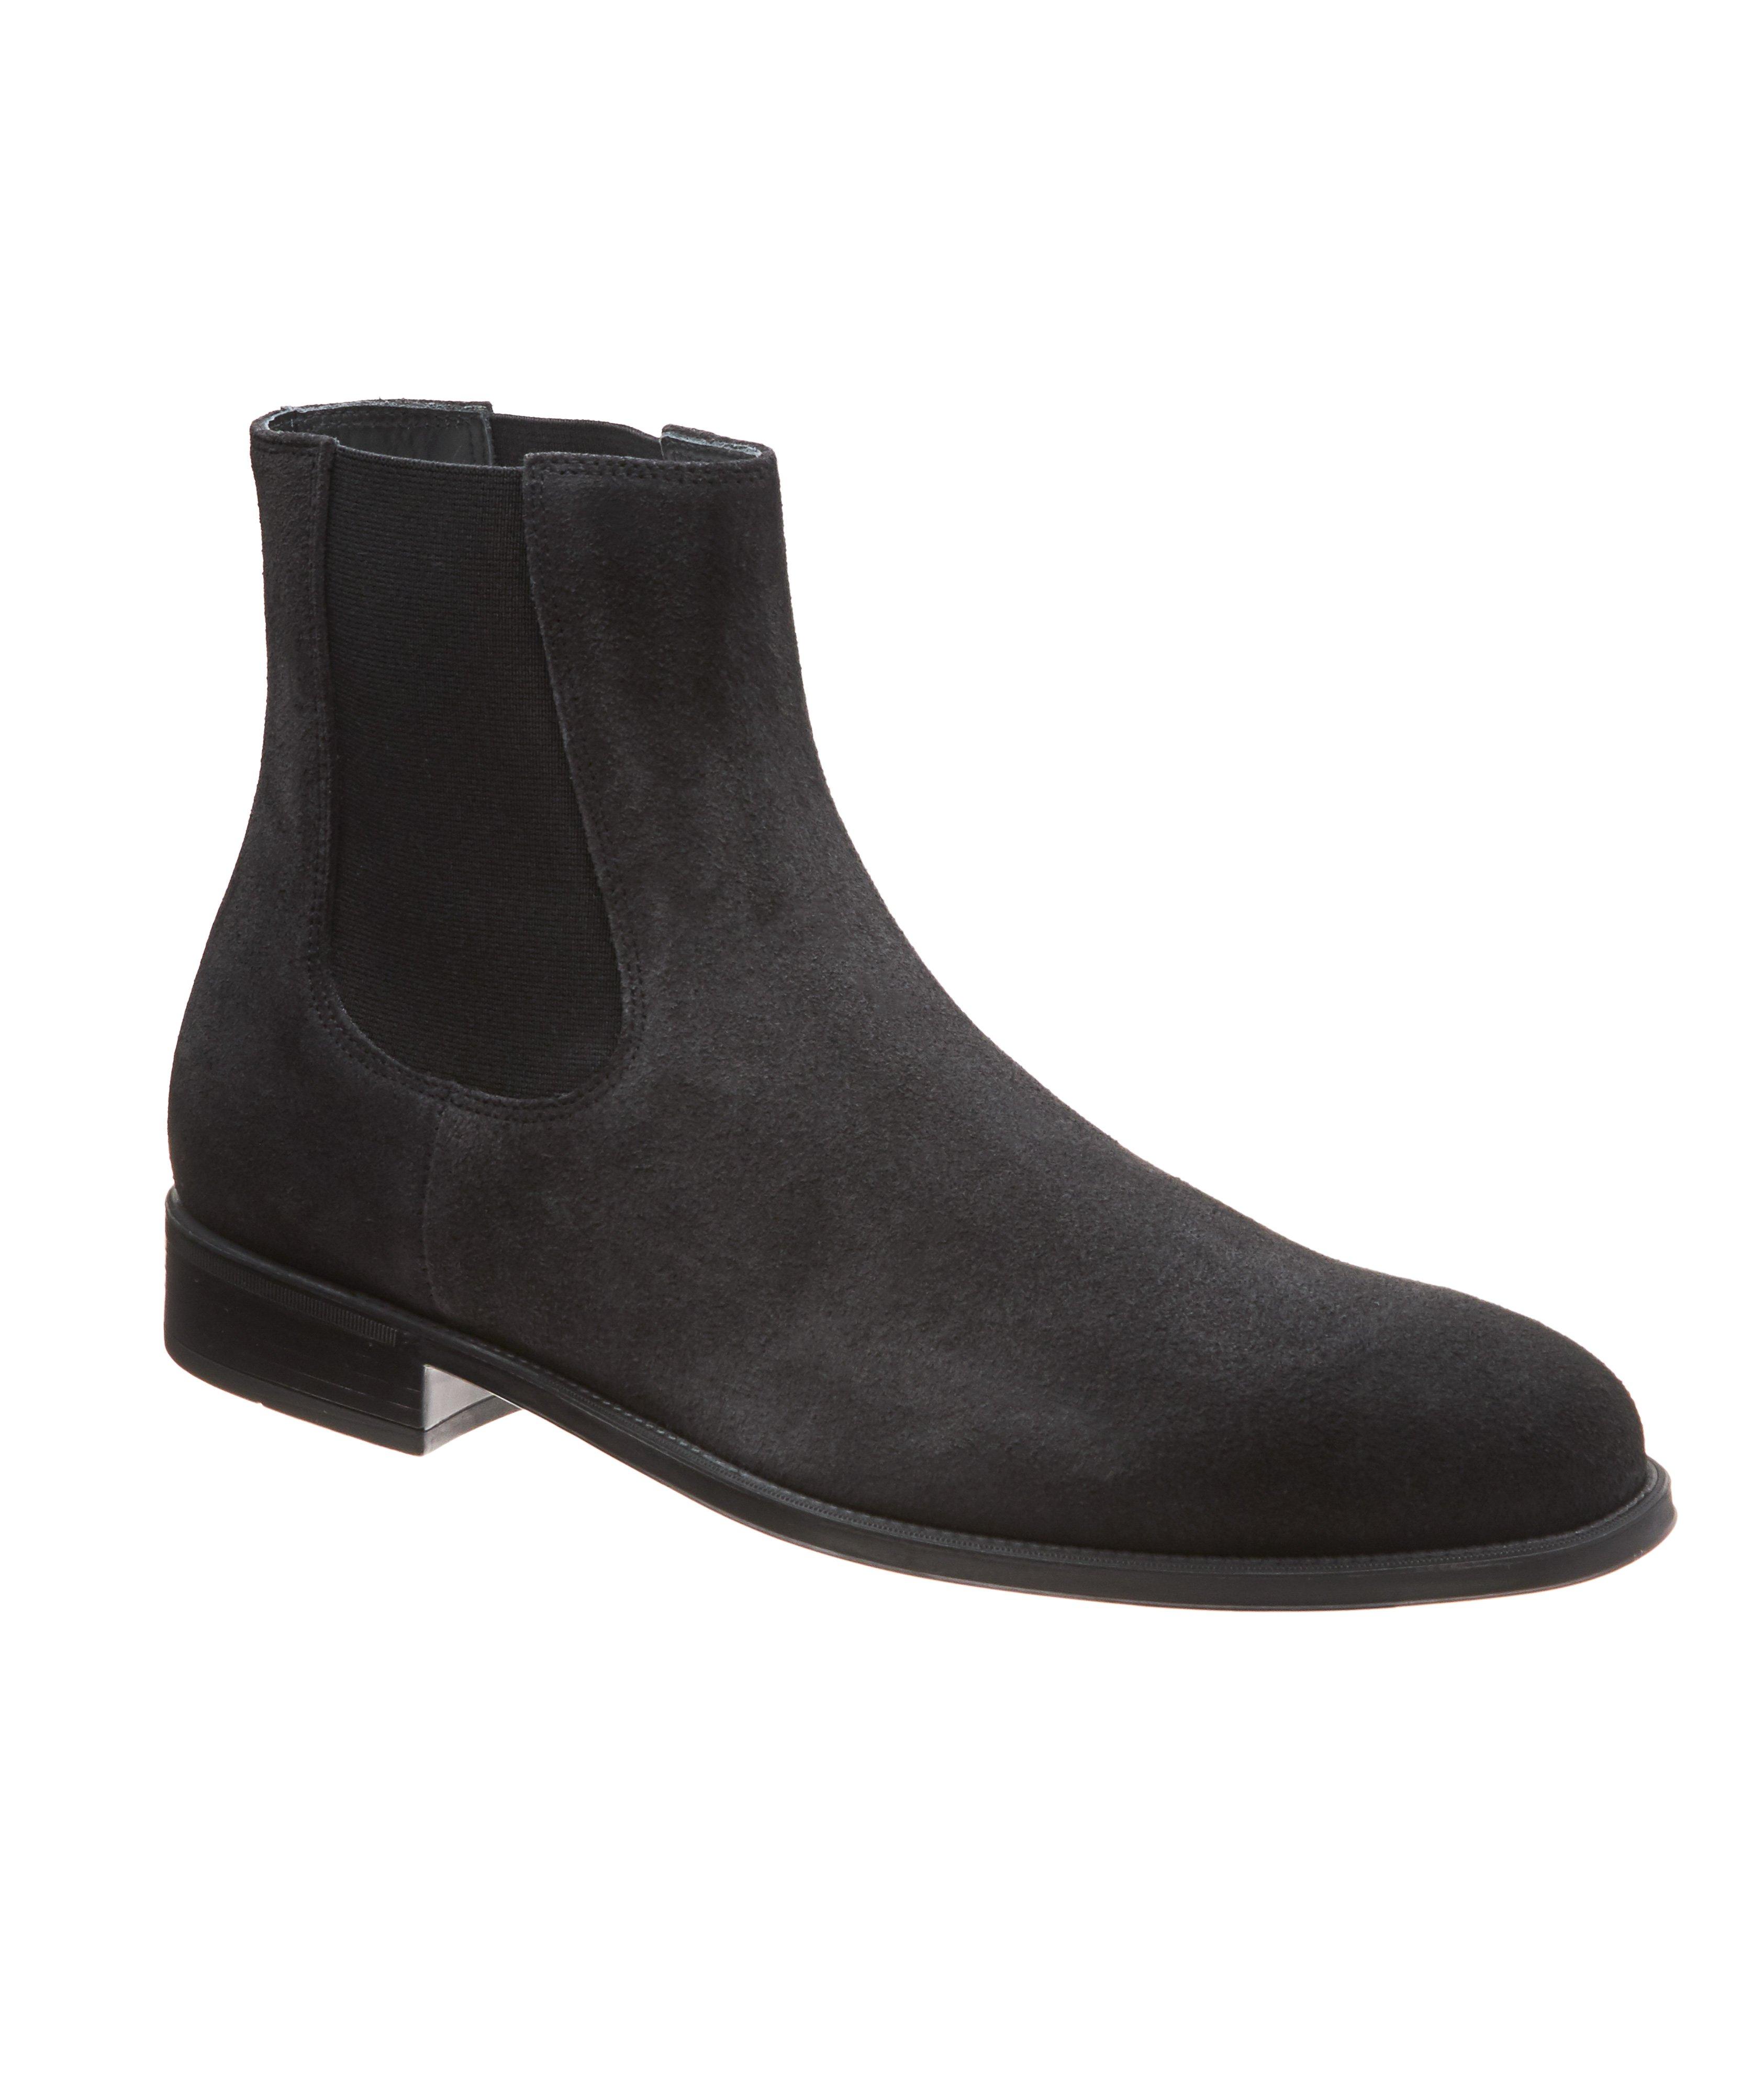 Suede Chelsea Boots image 0